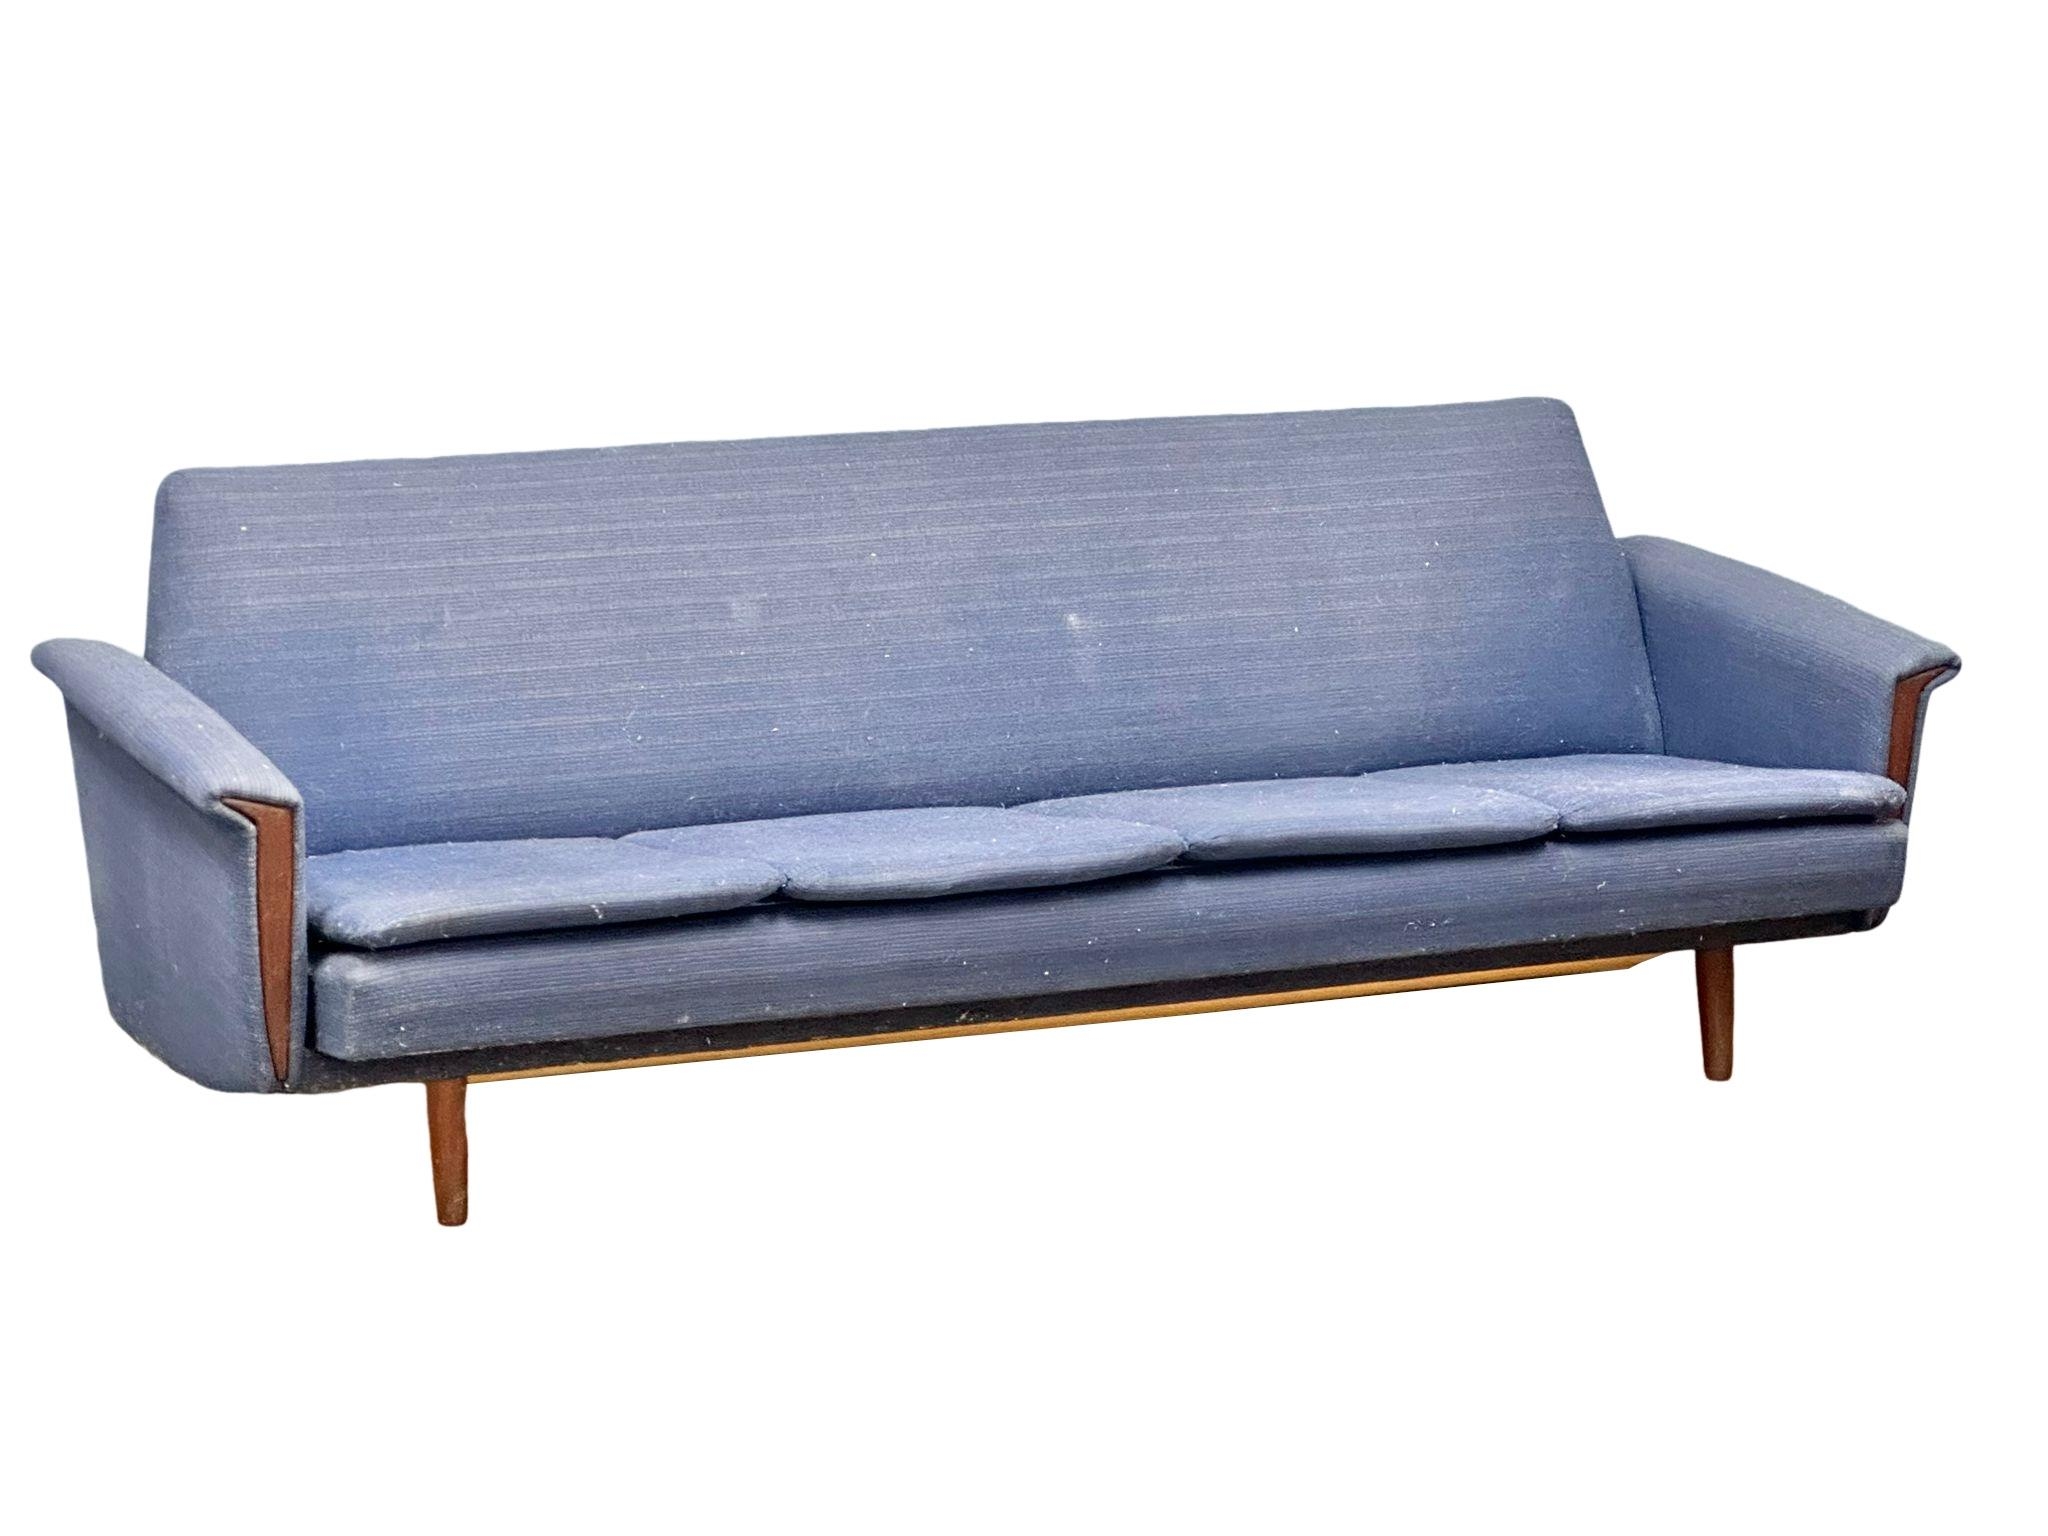 A Danish Mid Century teak framed sofa bed/daybed. 1960’s/70’s. 215cm